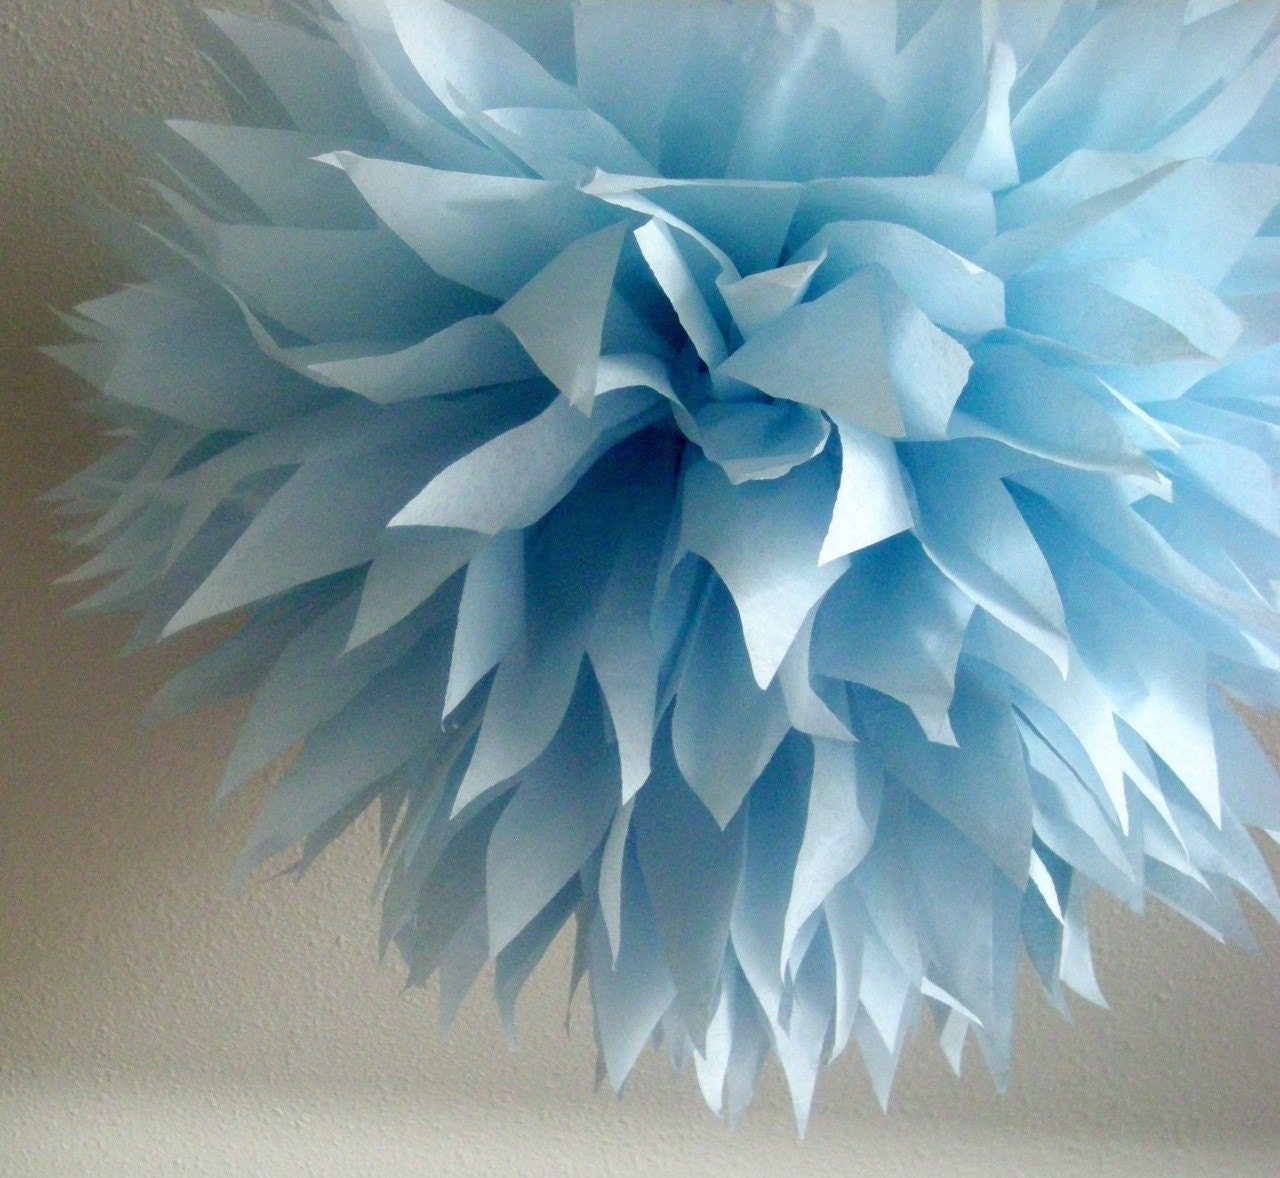 Details about   Baby Blue Tissue Pom Poms Paper Home Wedding Birthday Party Table pompoms 